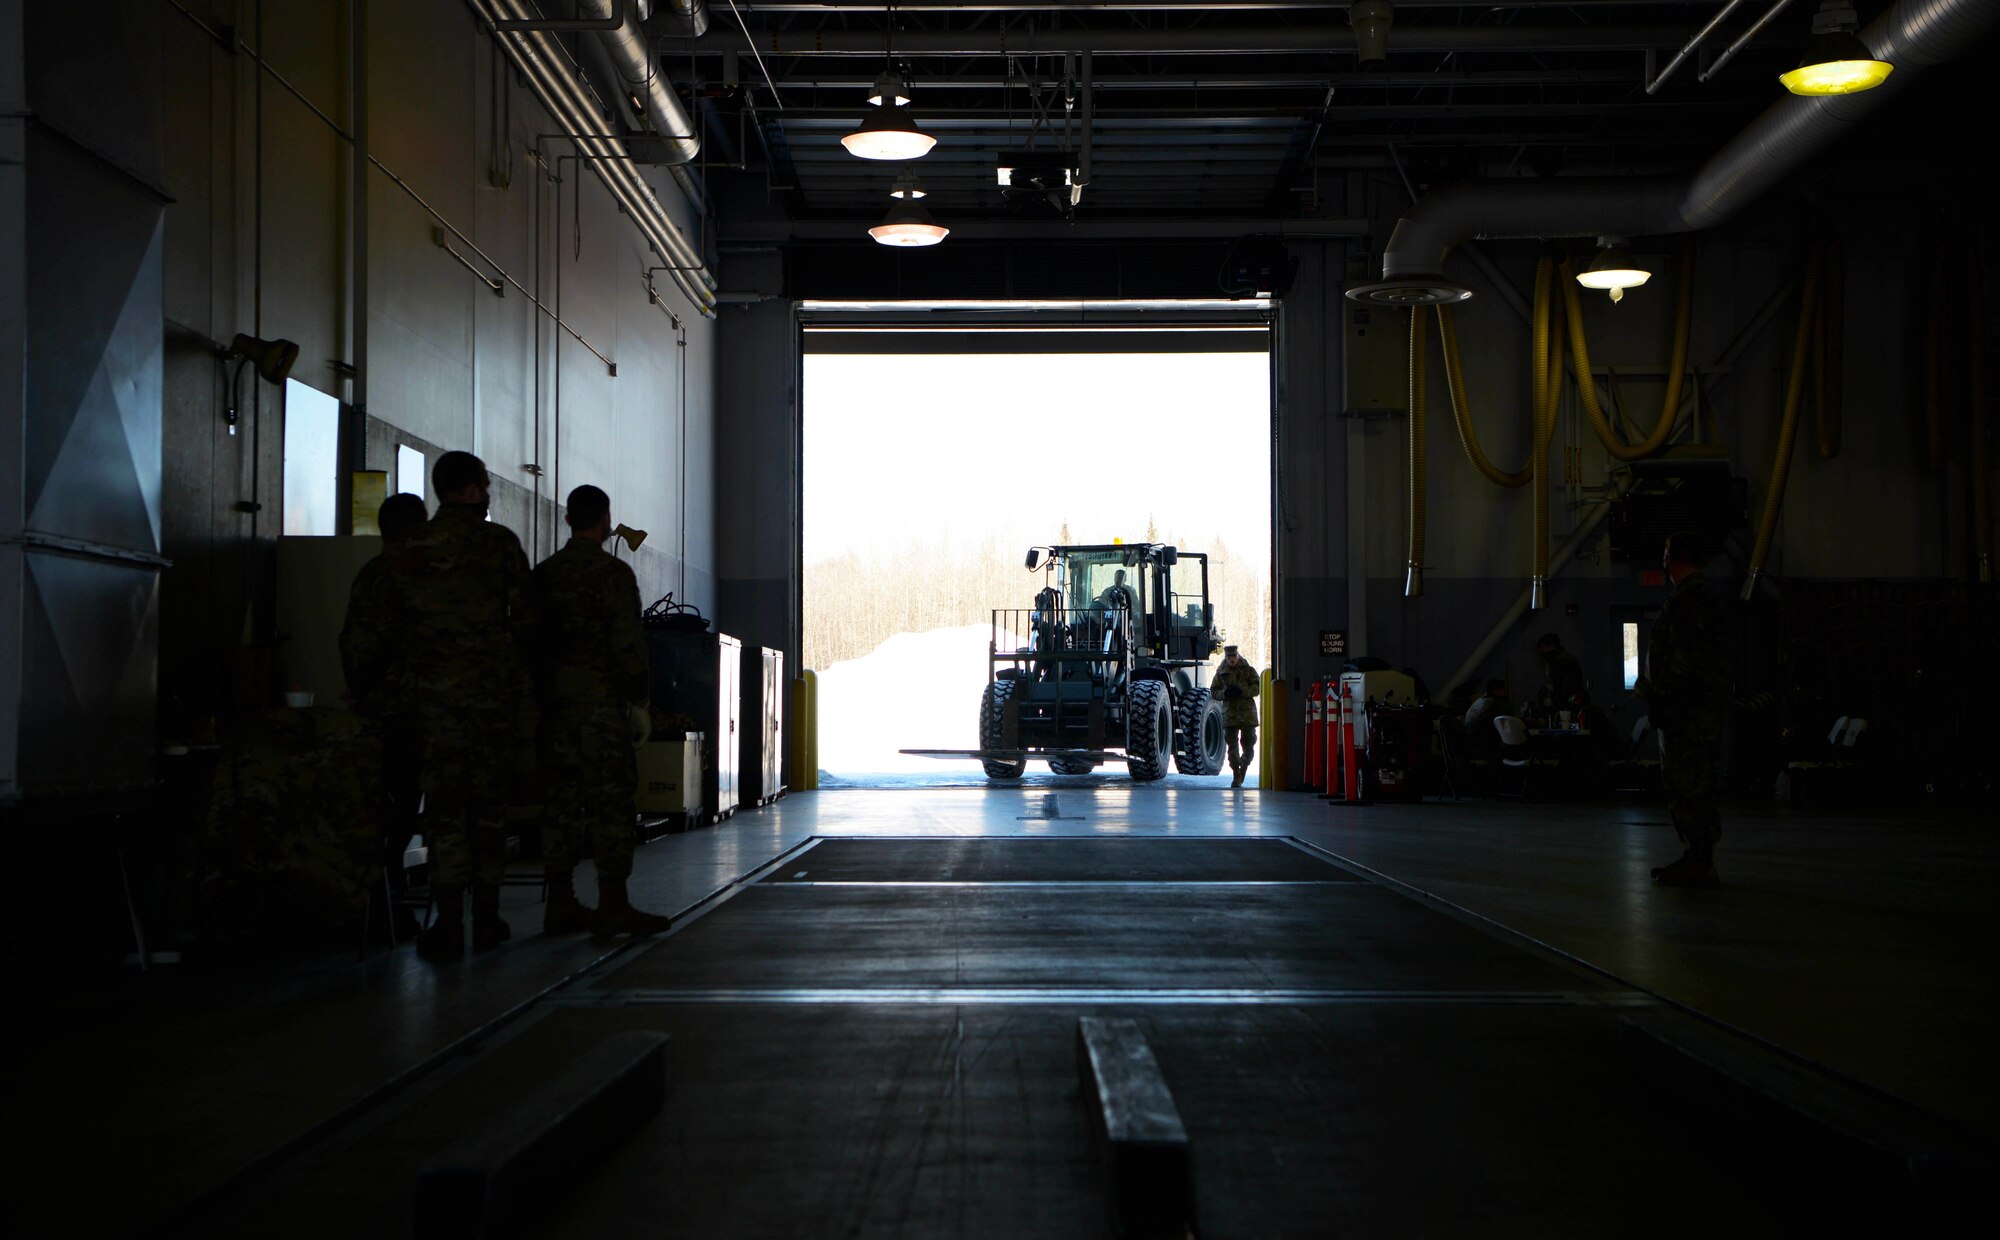 U.S. Air Force Airman 1st Class Cambrin Dixon, a 354th Logistics Readiness Squadron ground transportation vehicle operator, moves a cargo pallet using a forklift during Arctic Gold (AG) 21-1 April 6, 2021, on Eielson Air Force Base, Alaska. The purpose of Arctic Gold 21-2 is to evaluate the 354th Fighter Wing’s ability to effectively generate F-35A Lightning II aircraft and deploy personnel and cargo from across the wing. (U.S. Air Force photo by Senior Airman Beaux Hebert)